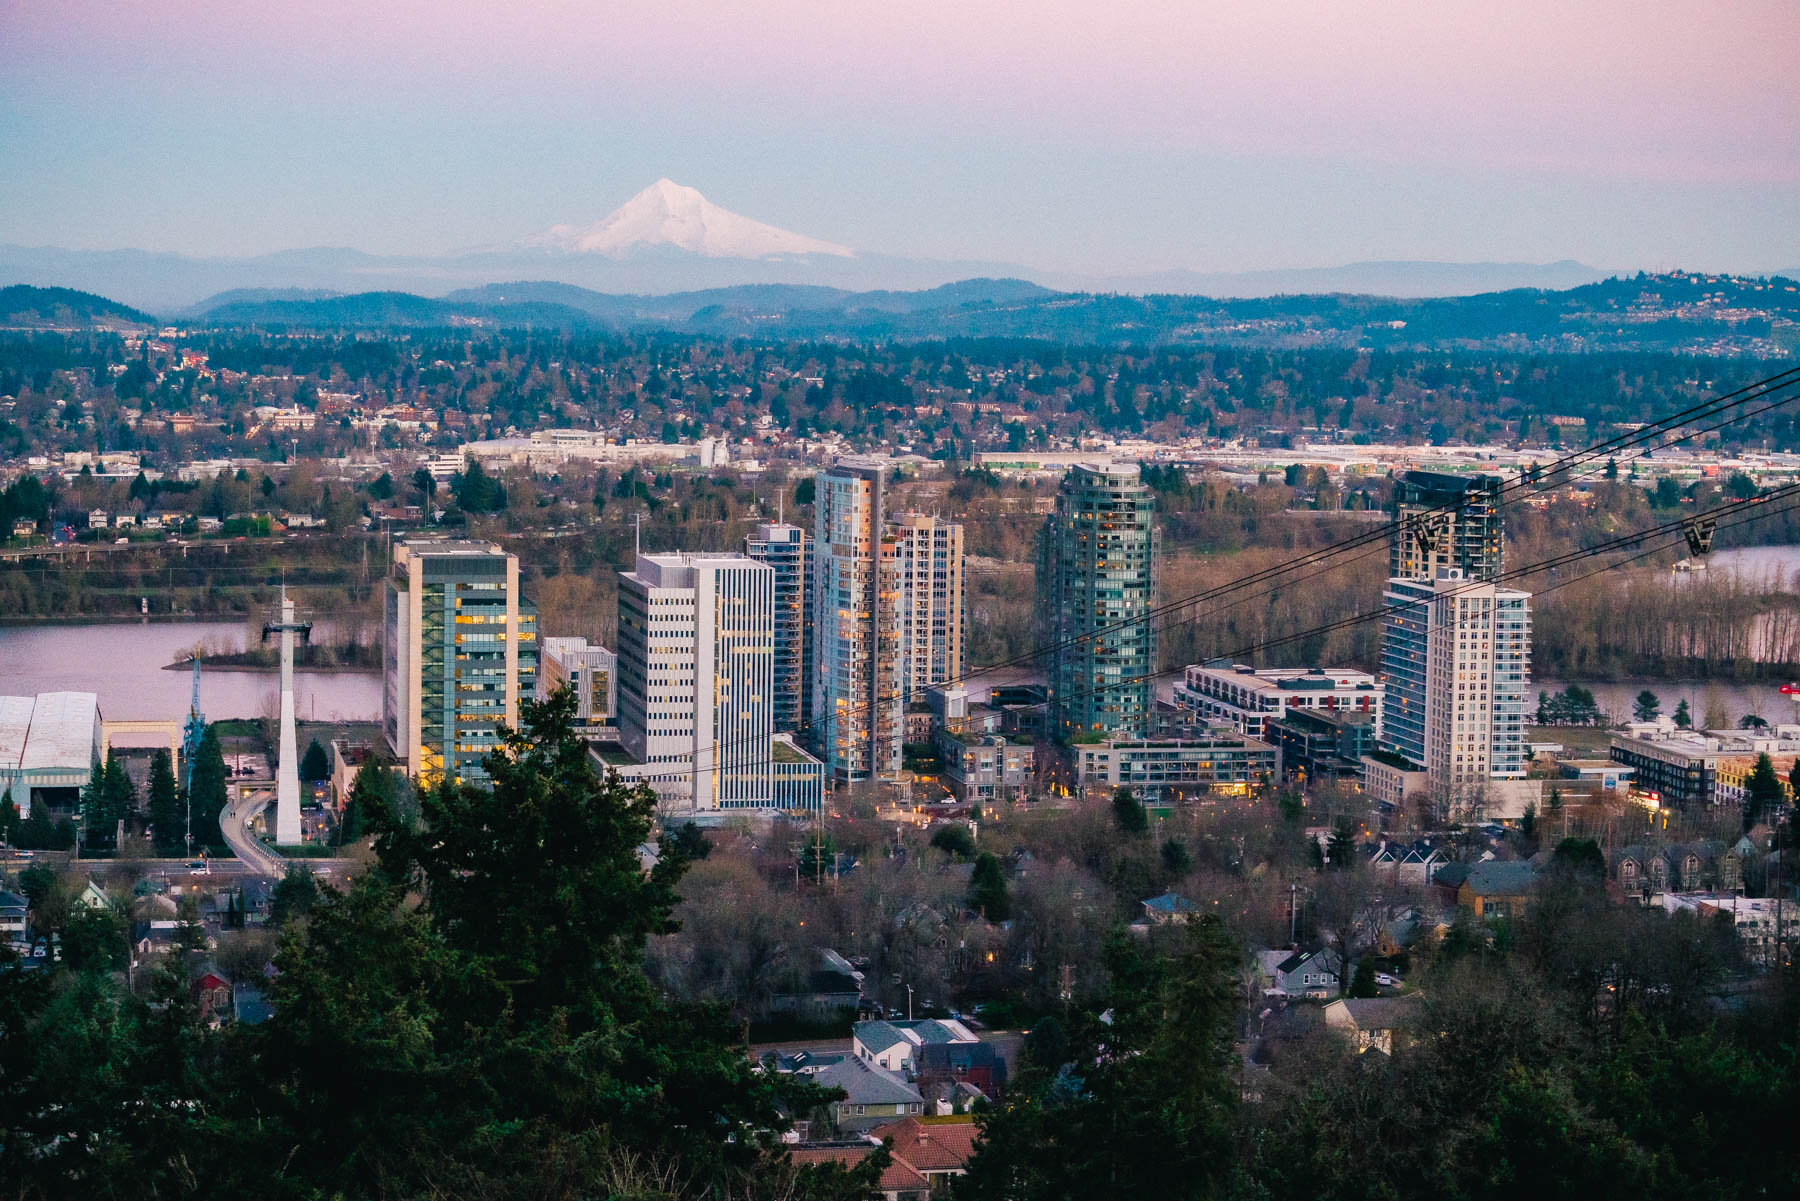 How to spend 1 day in Portland